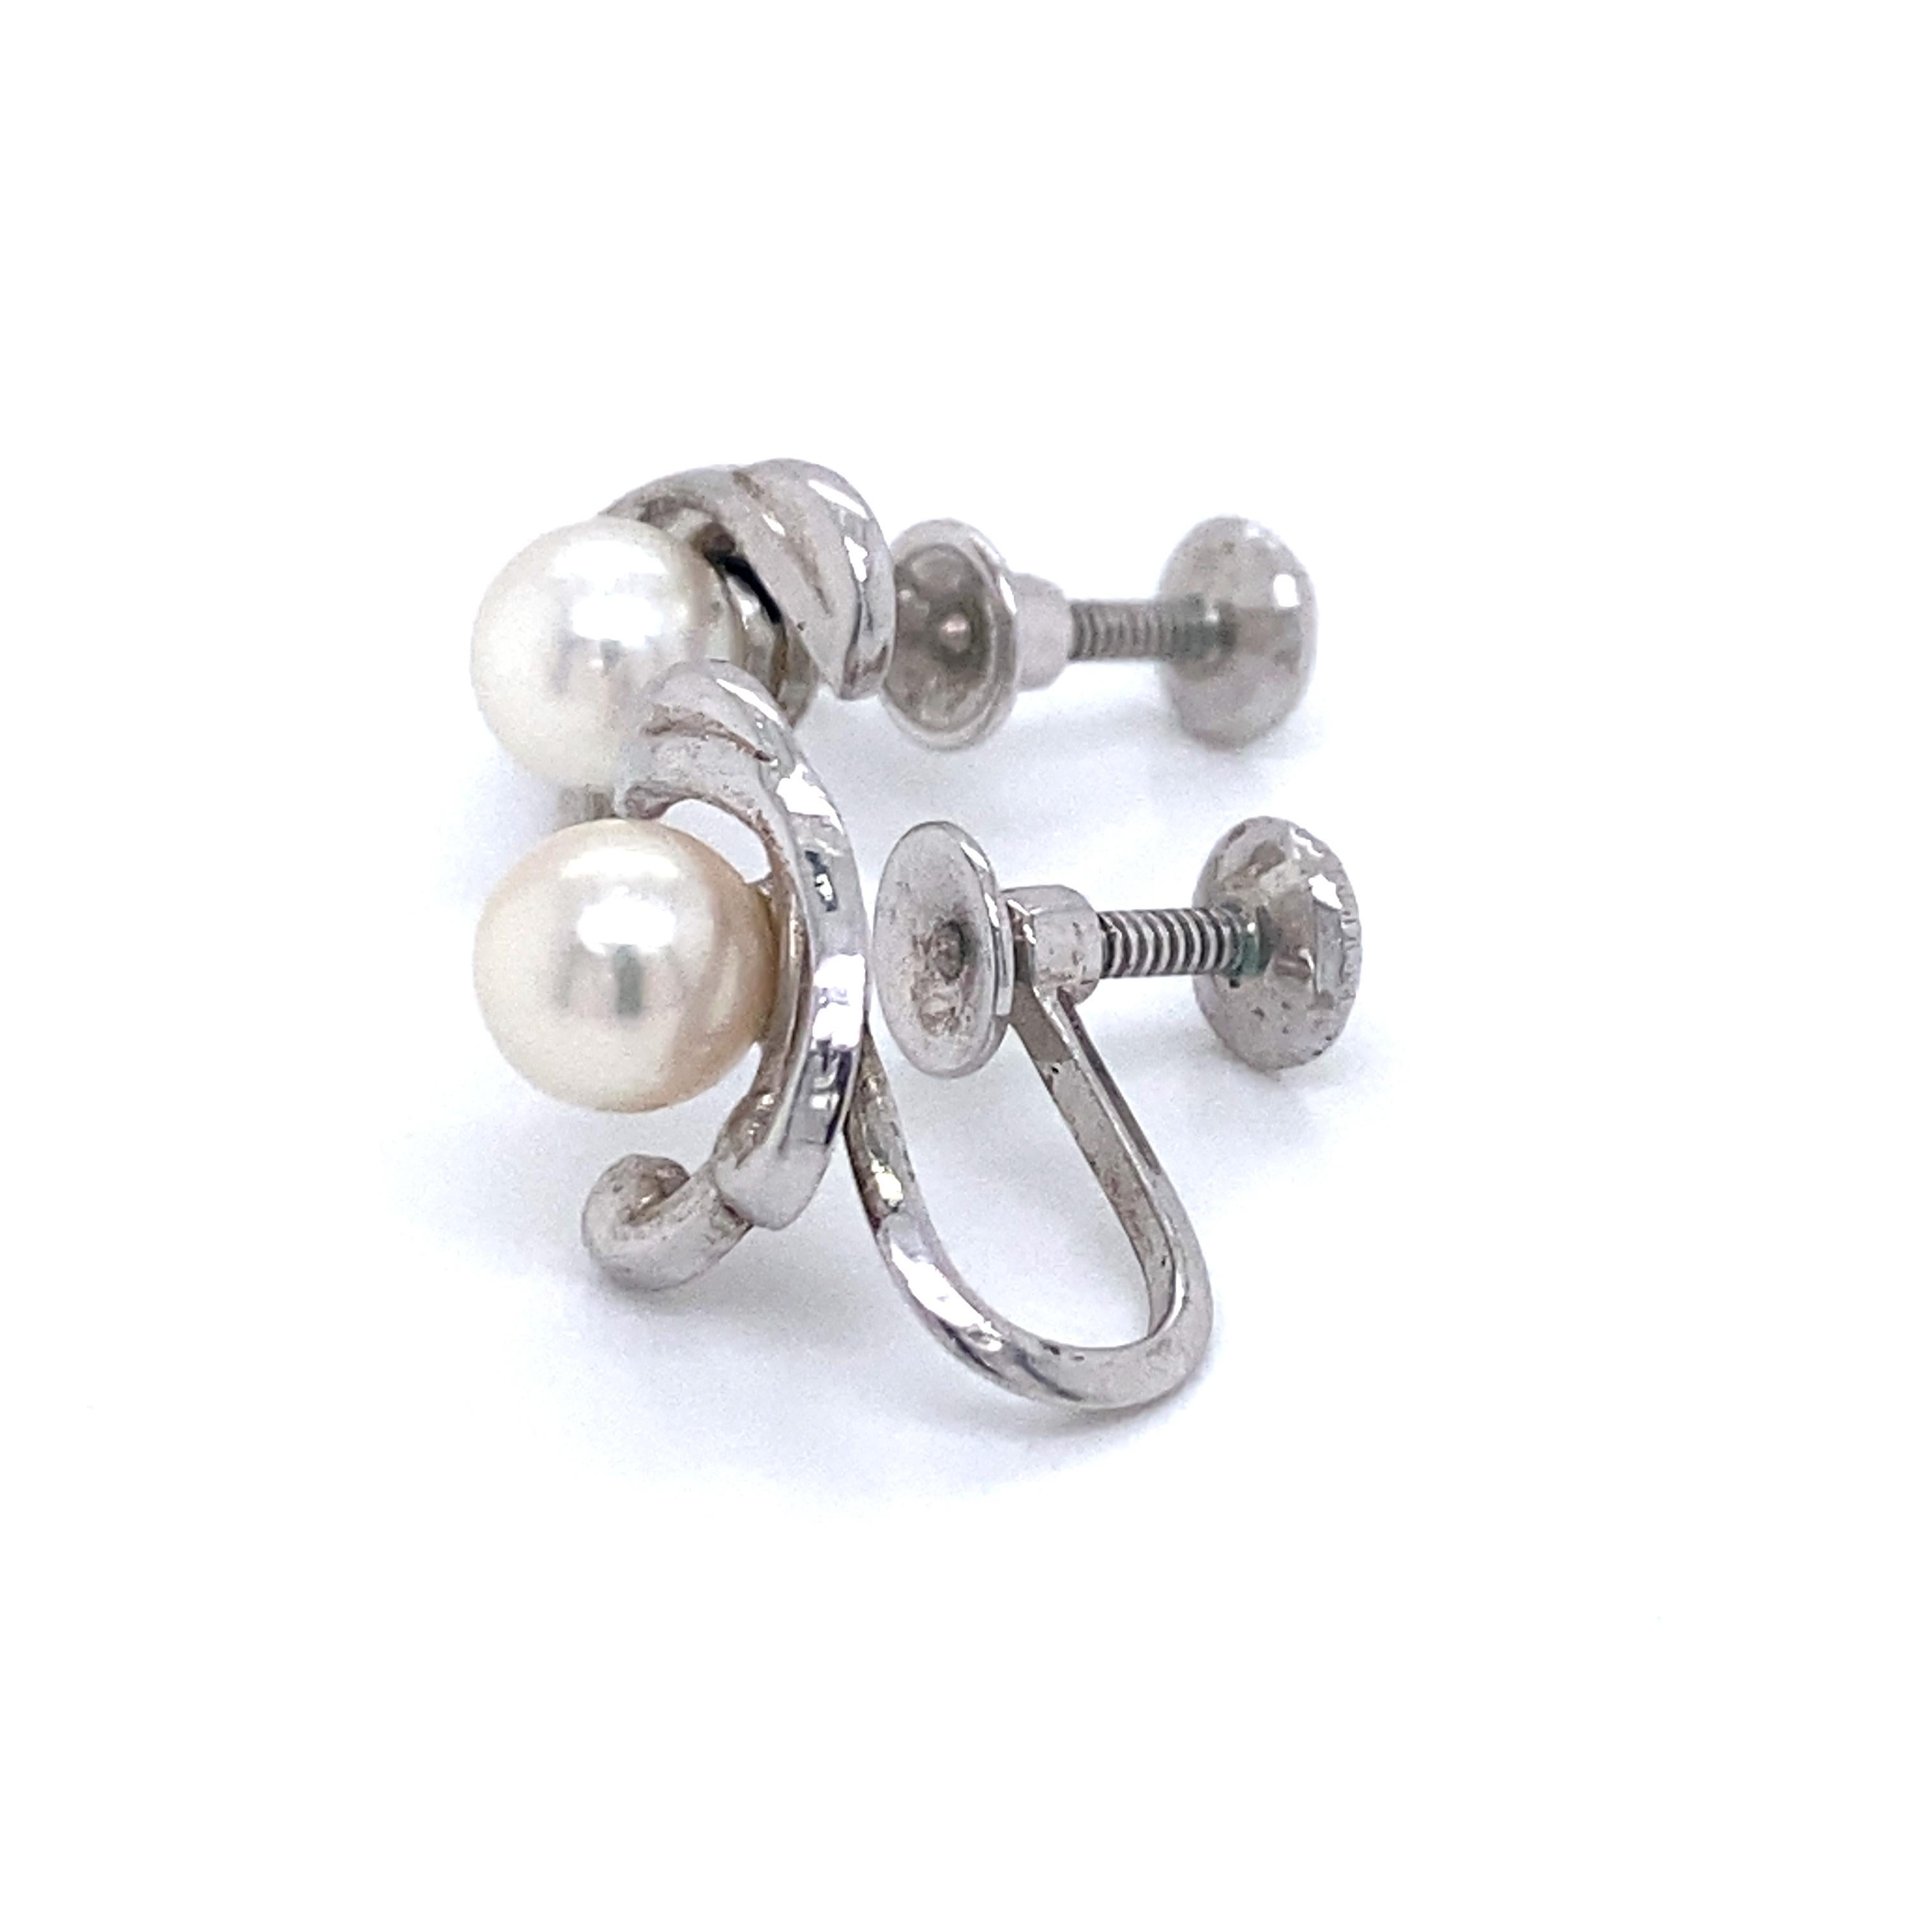 Mikimoto Estate Akoya Pearl Clip on Earrings Sterling Silver 3.53 Grams For Sale 5